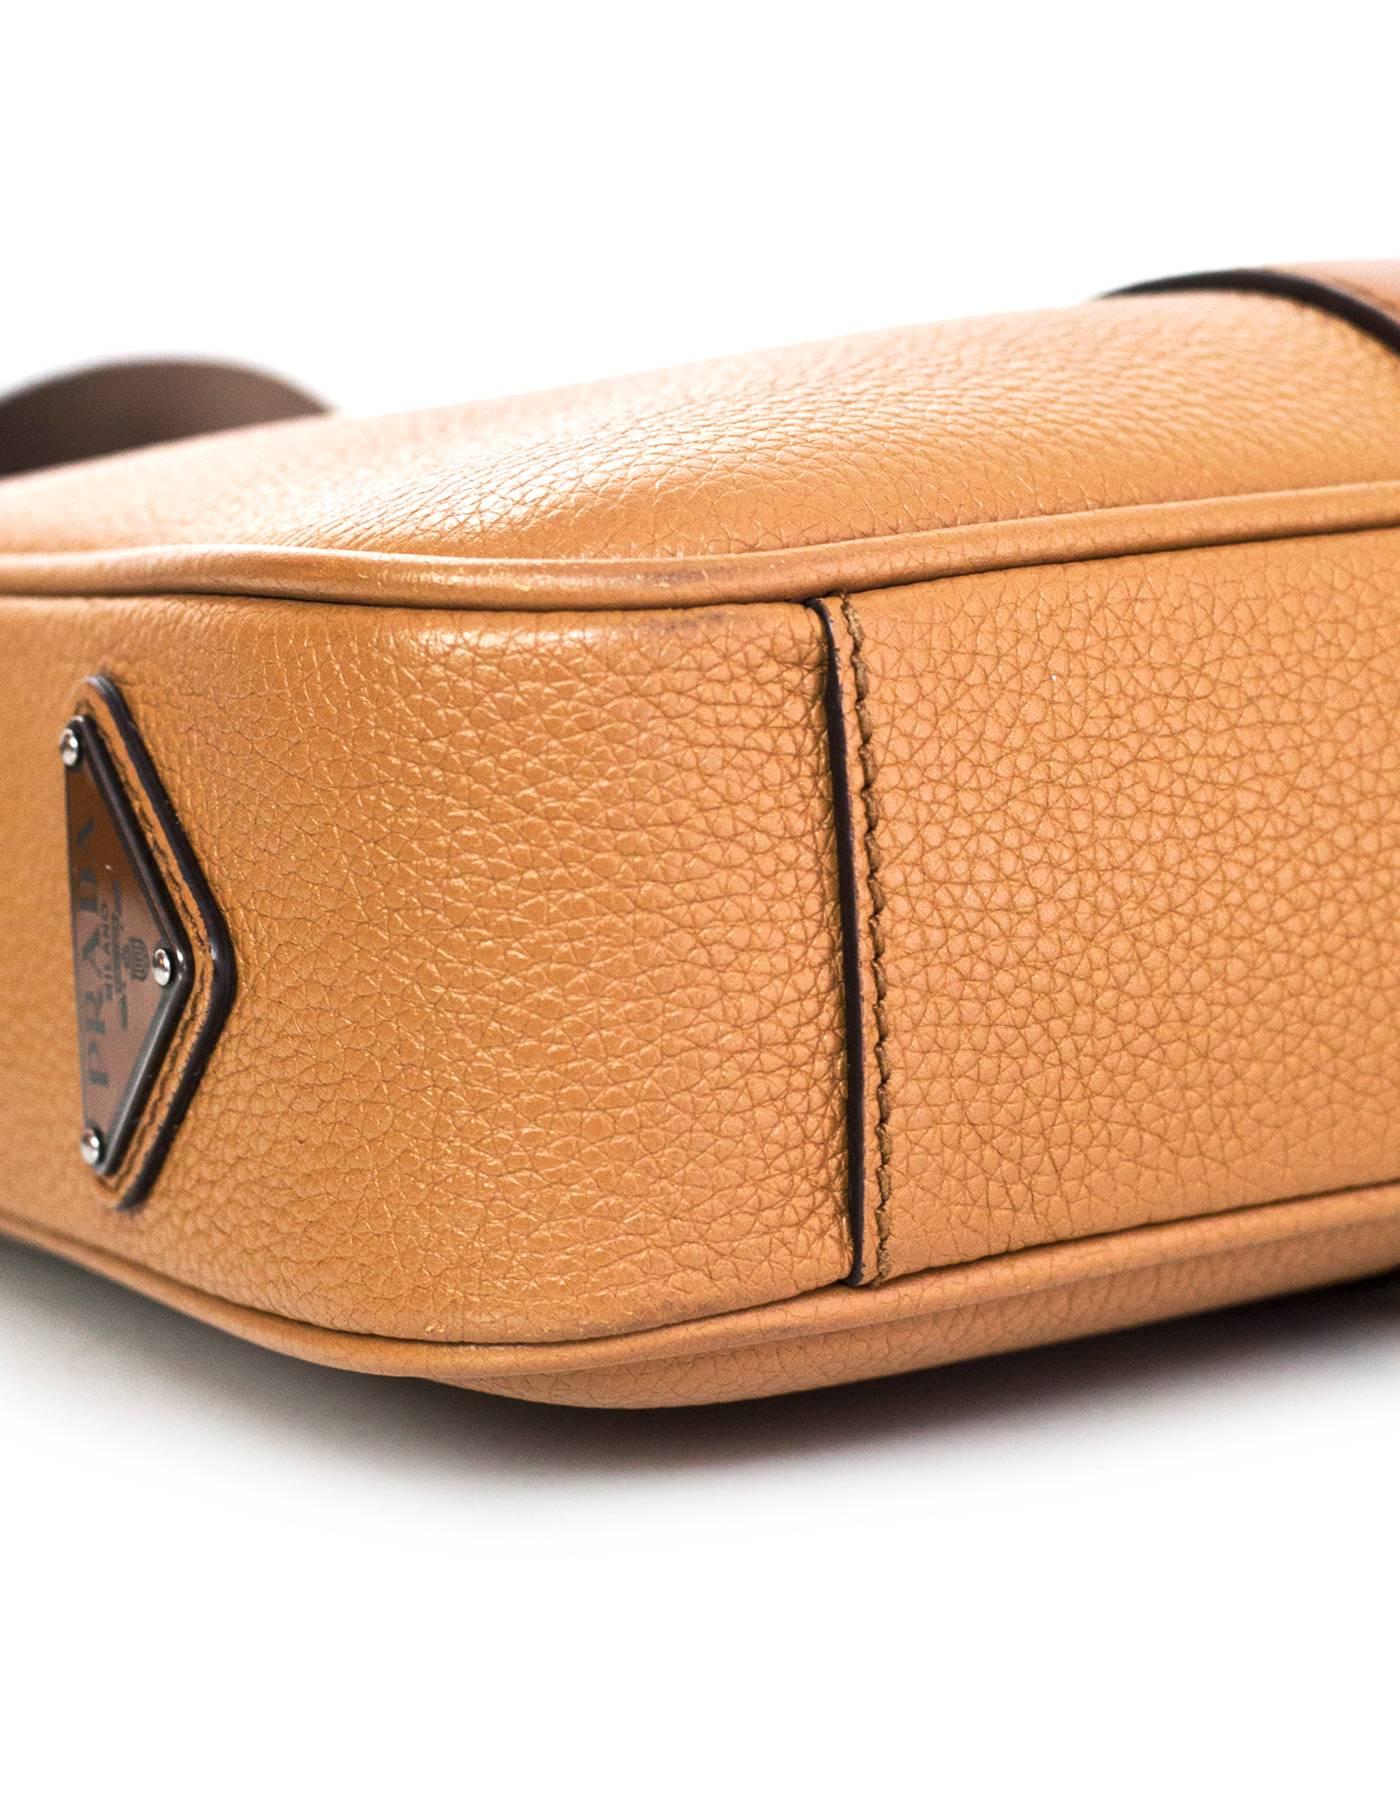 Orange Prada Tan Grained Leather Briefcase/Laptop Bag with Strap rt. $2, 200